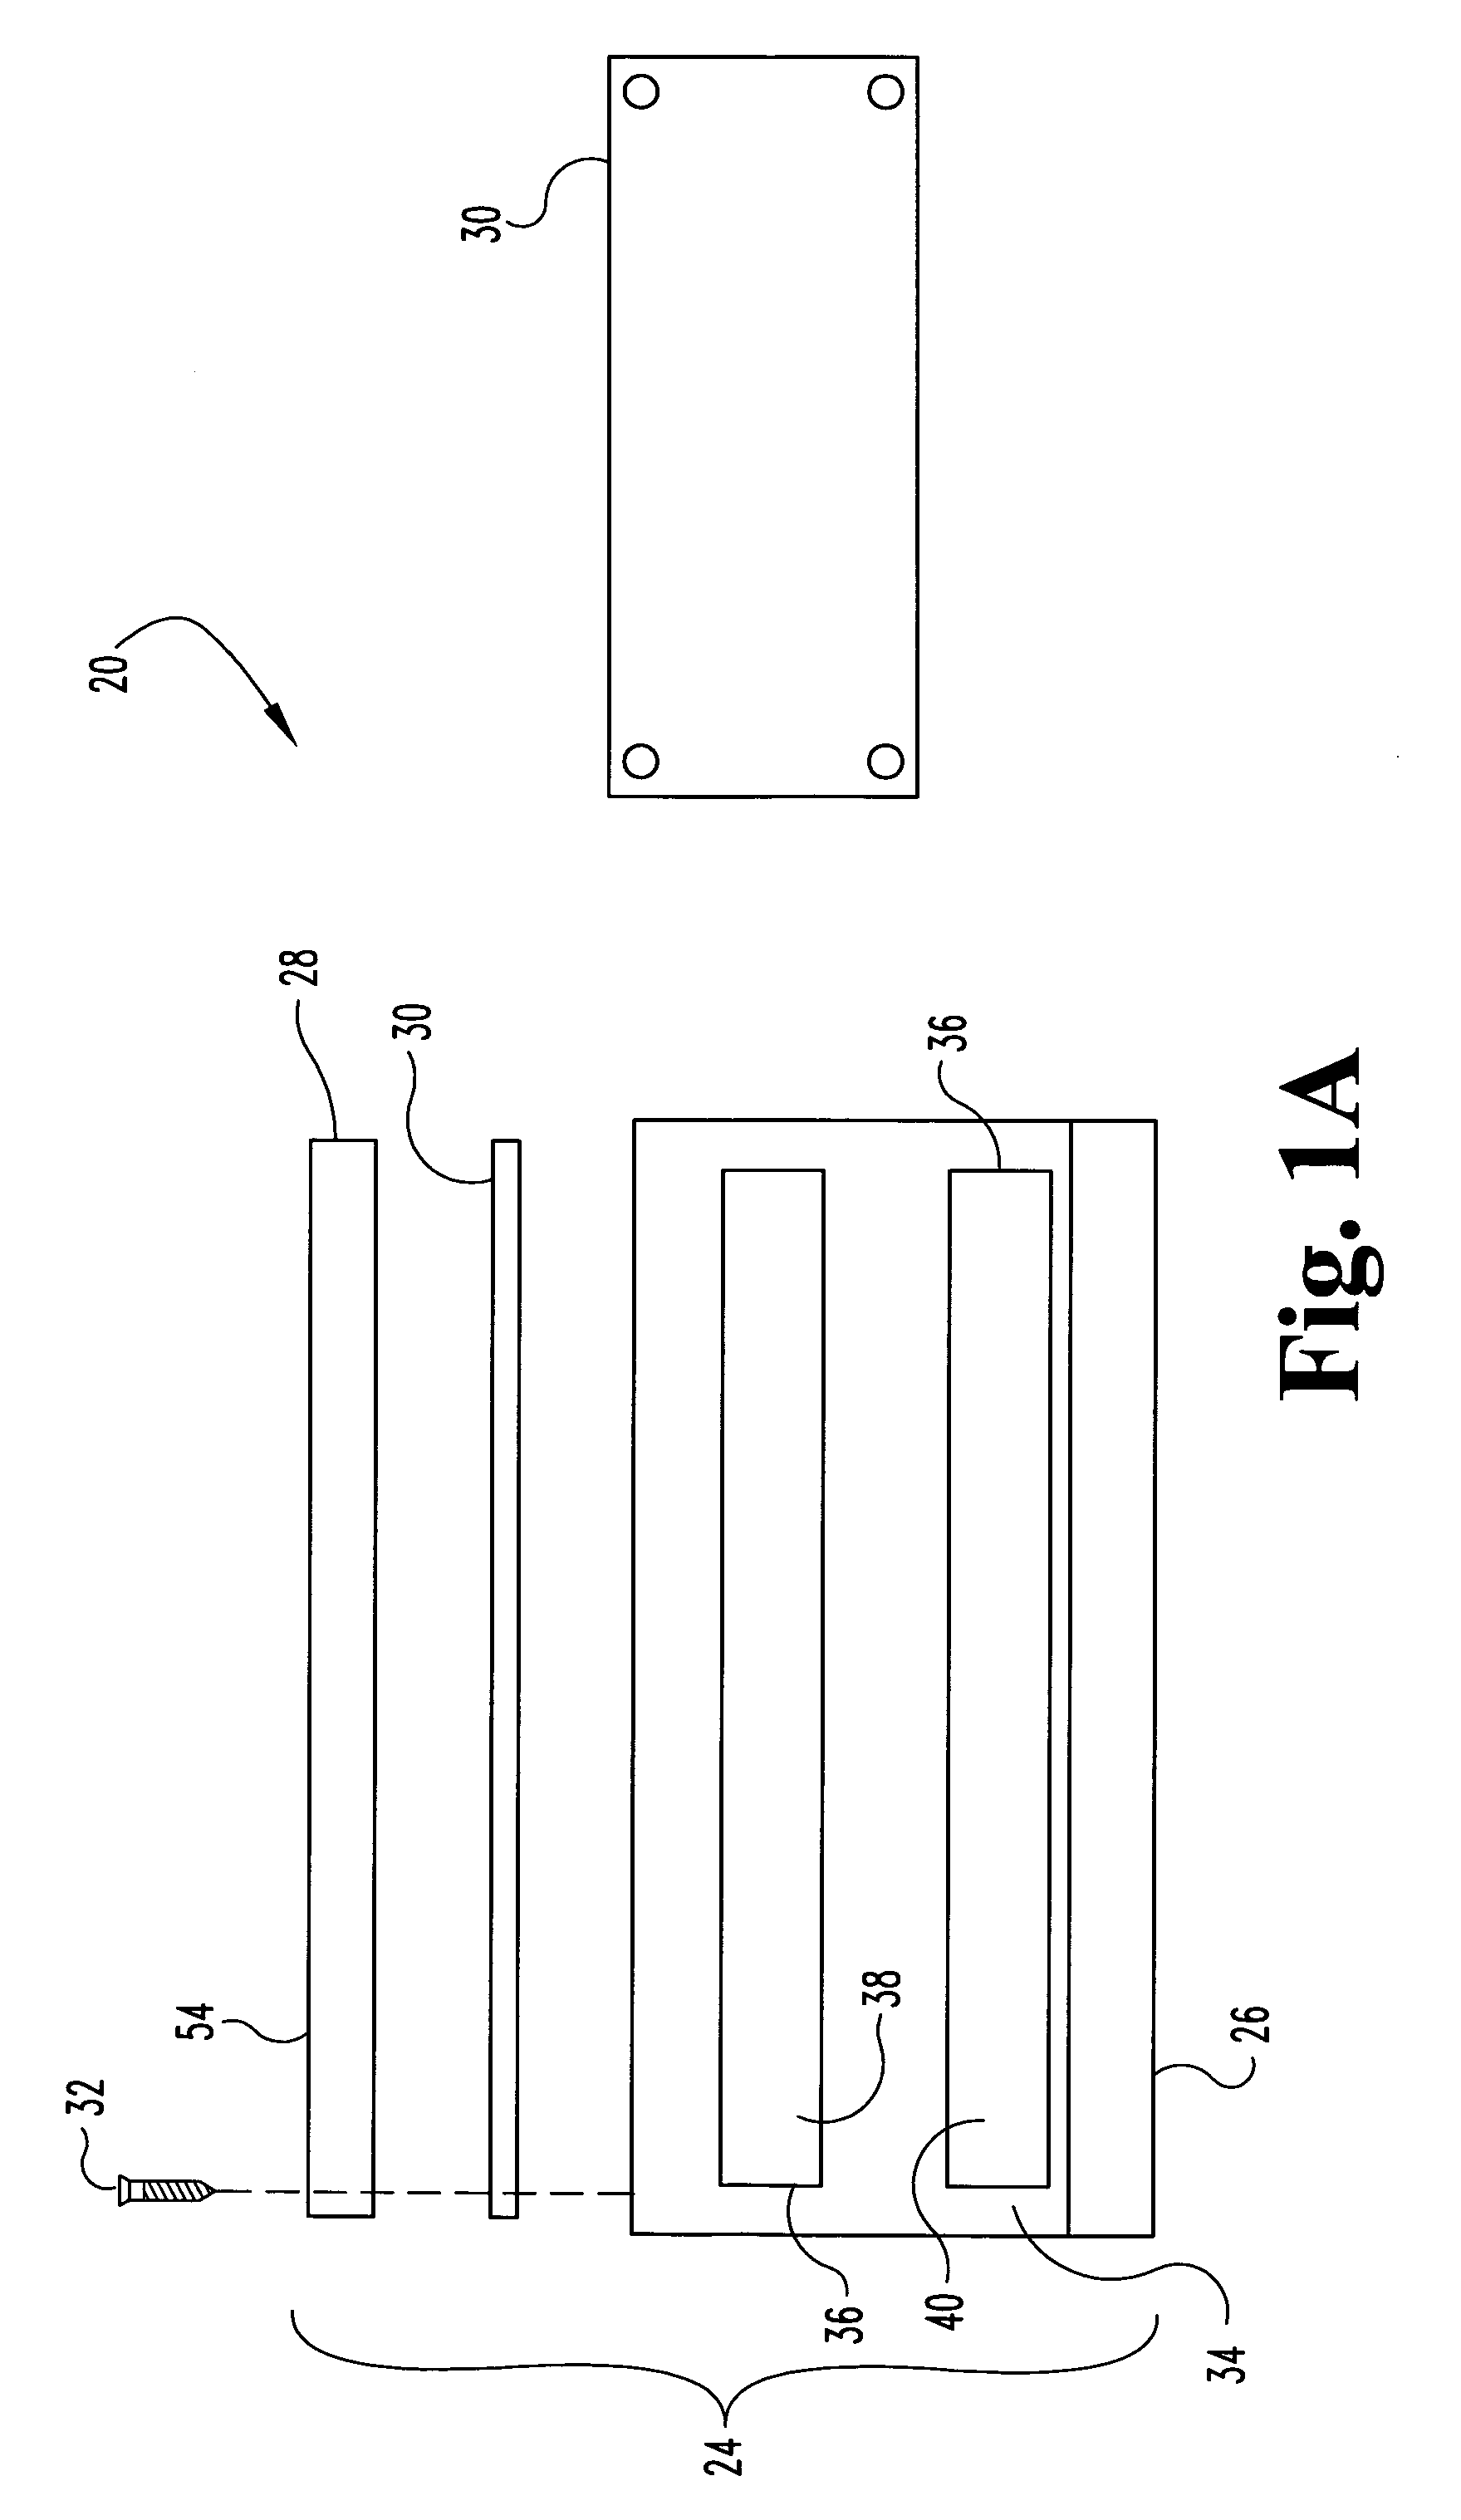 Portable illumination systems and methods of use